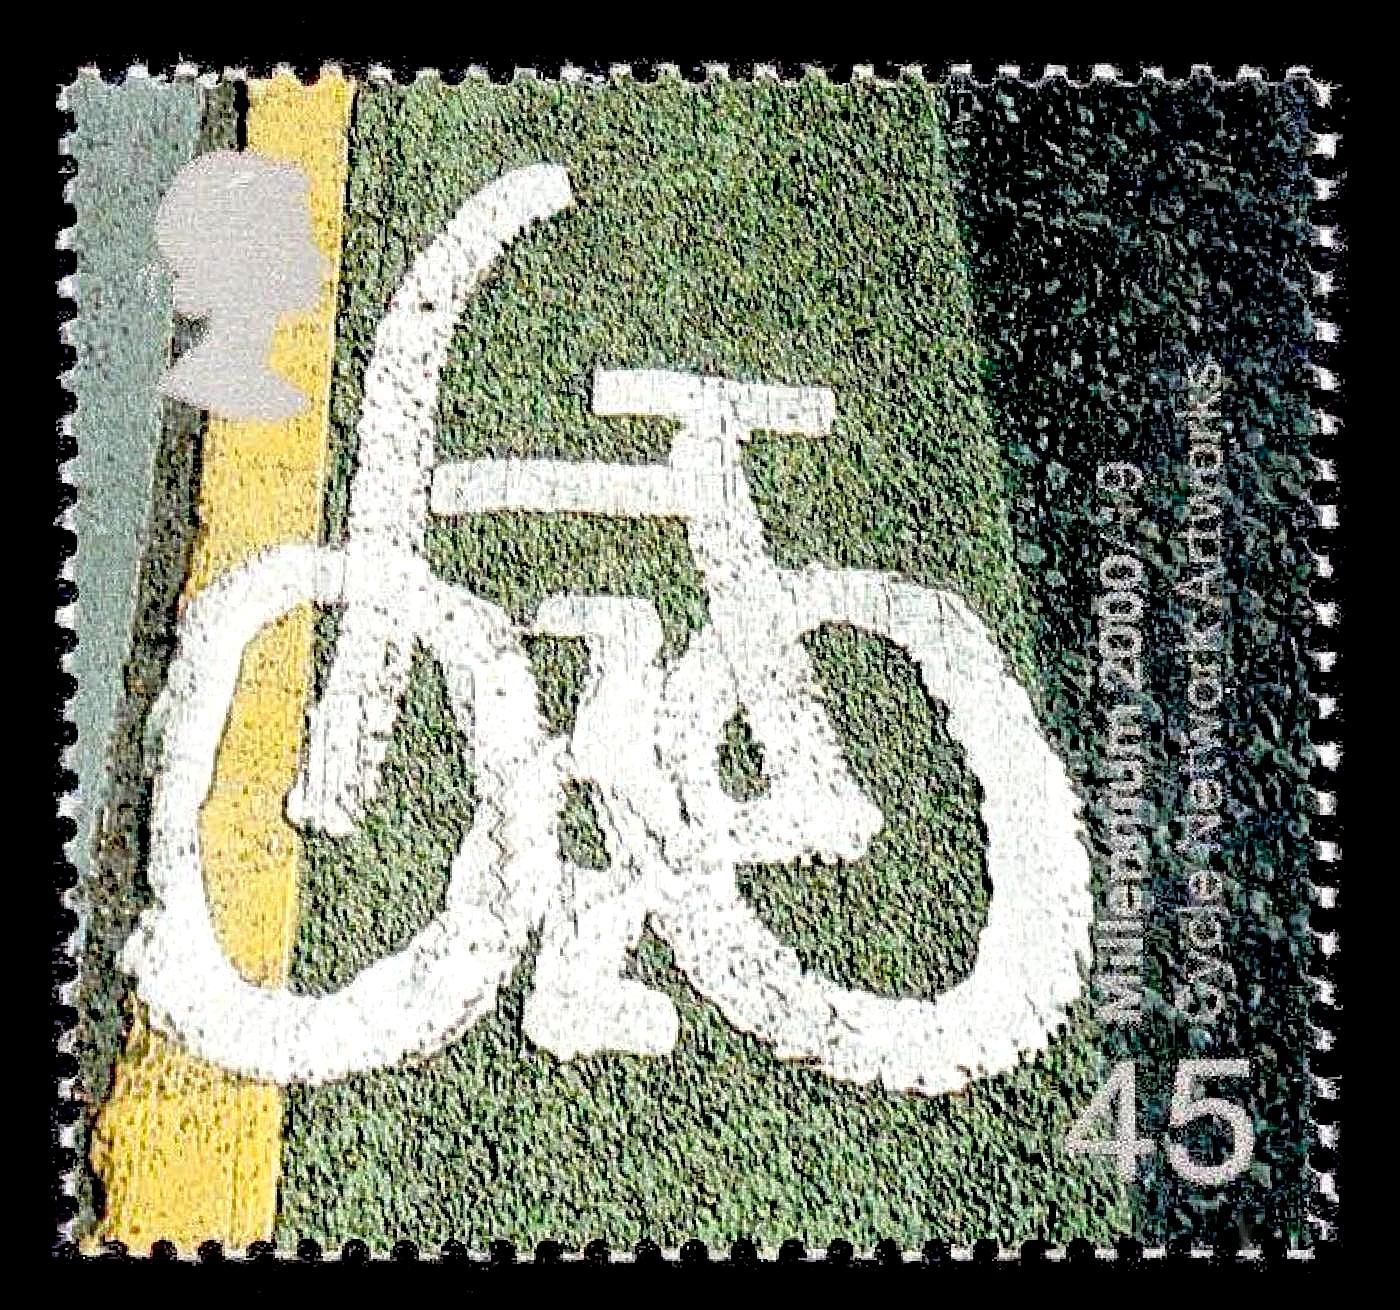 Cycle network